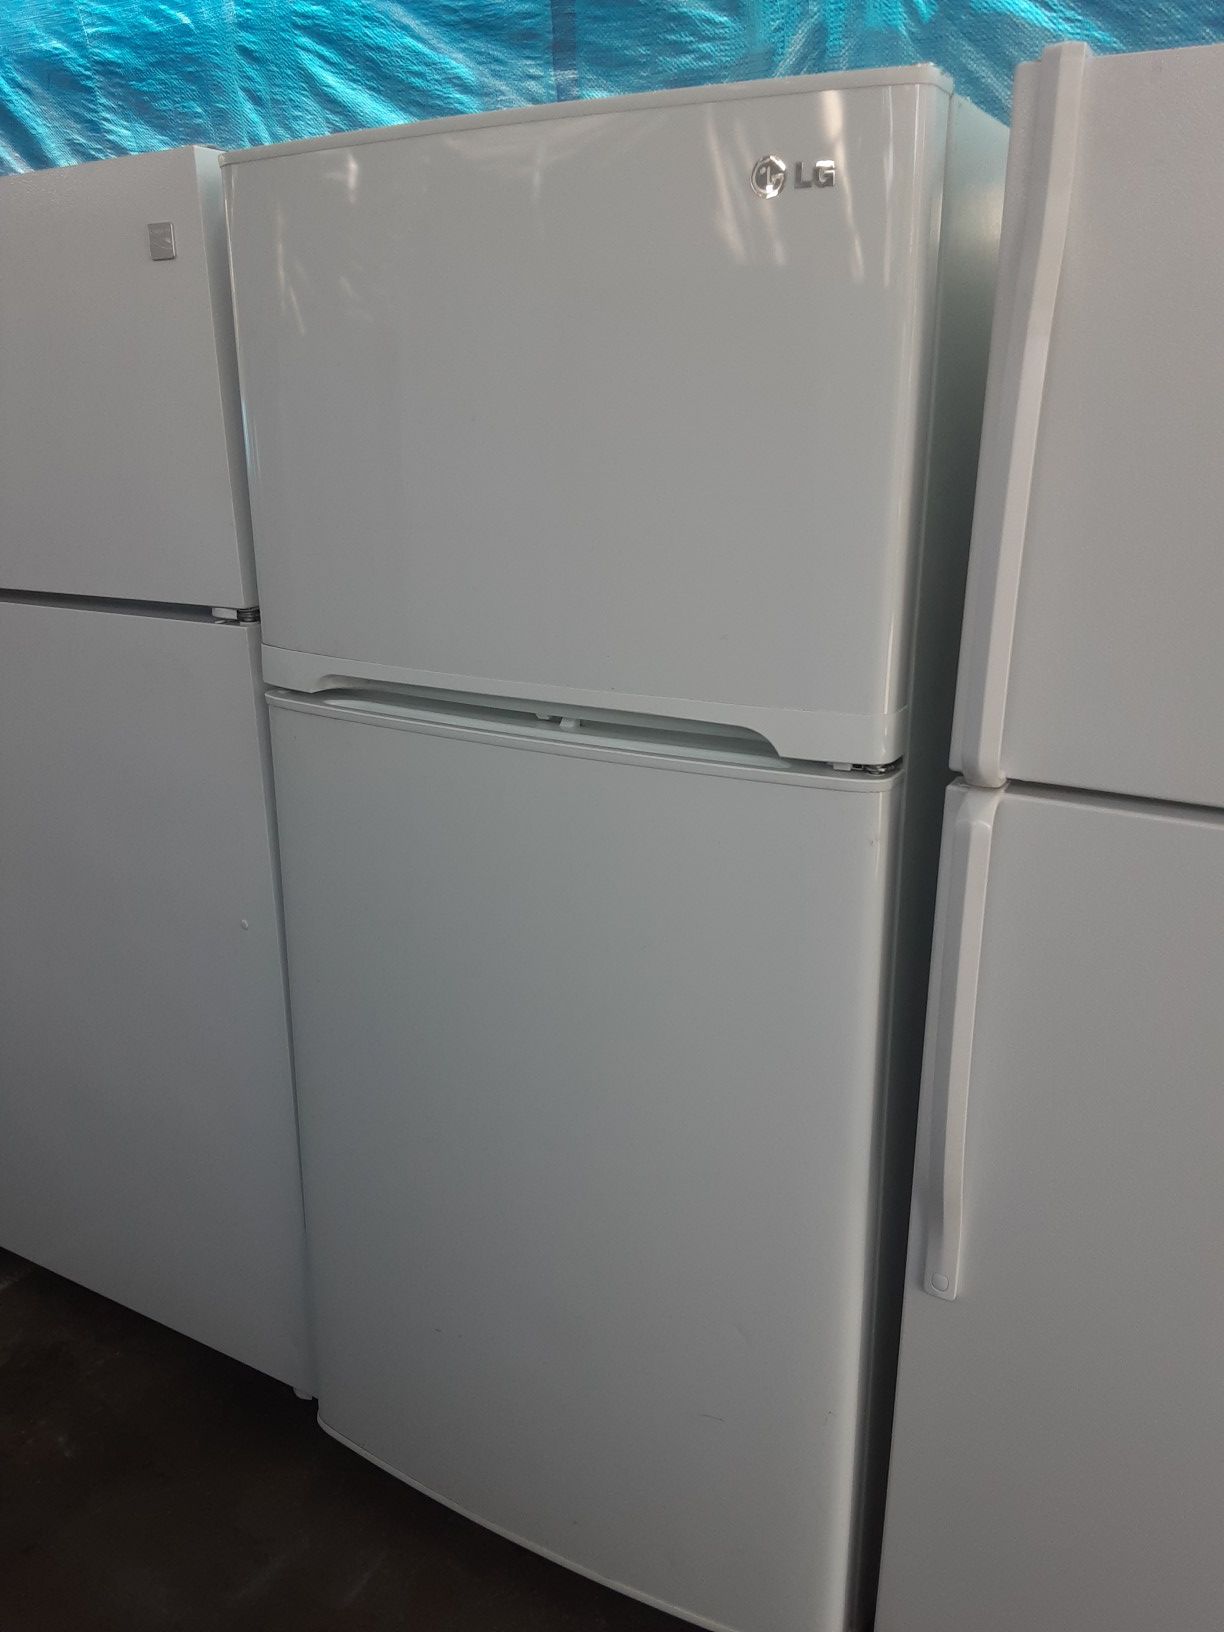 $275 LG White fridge includes delivery in the San Fernando Valley a warranty and installation